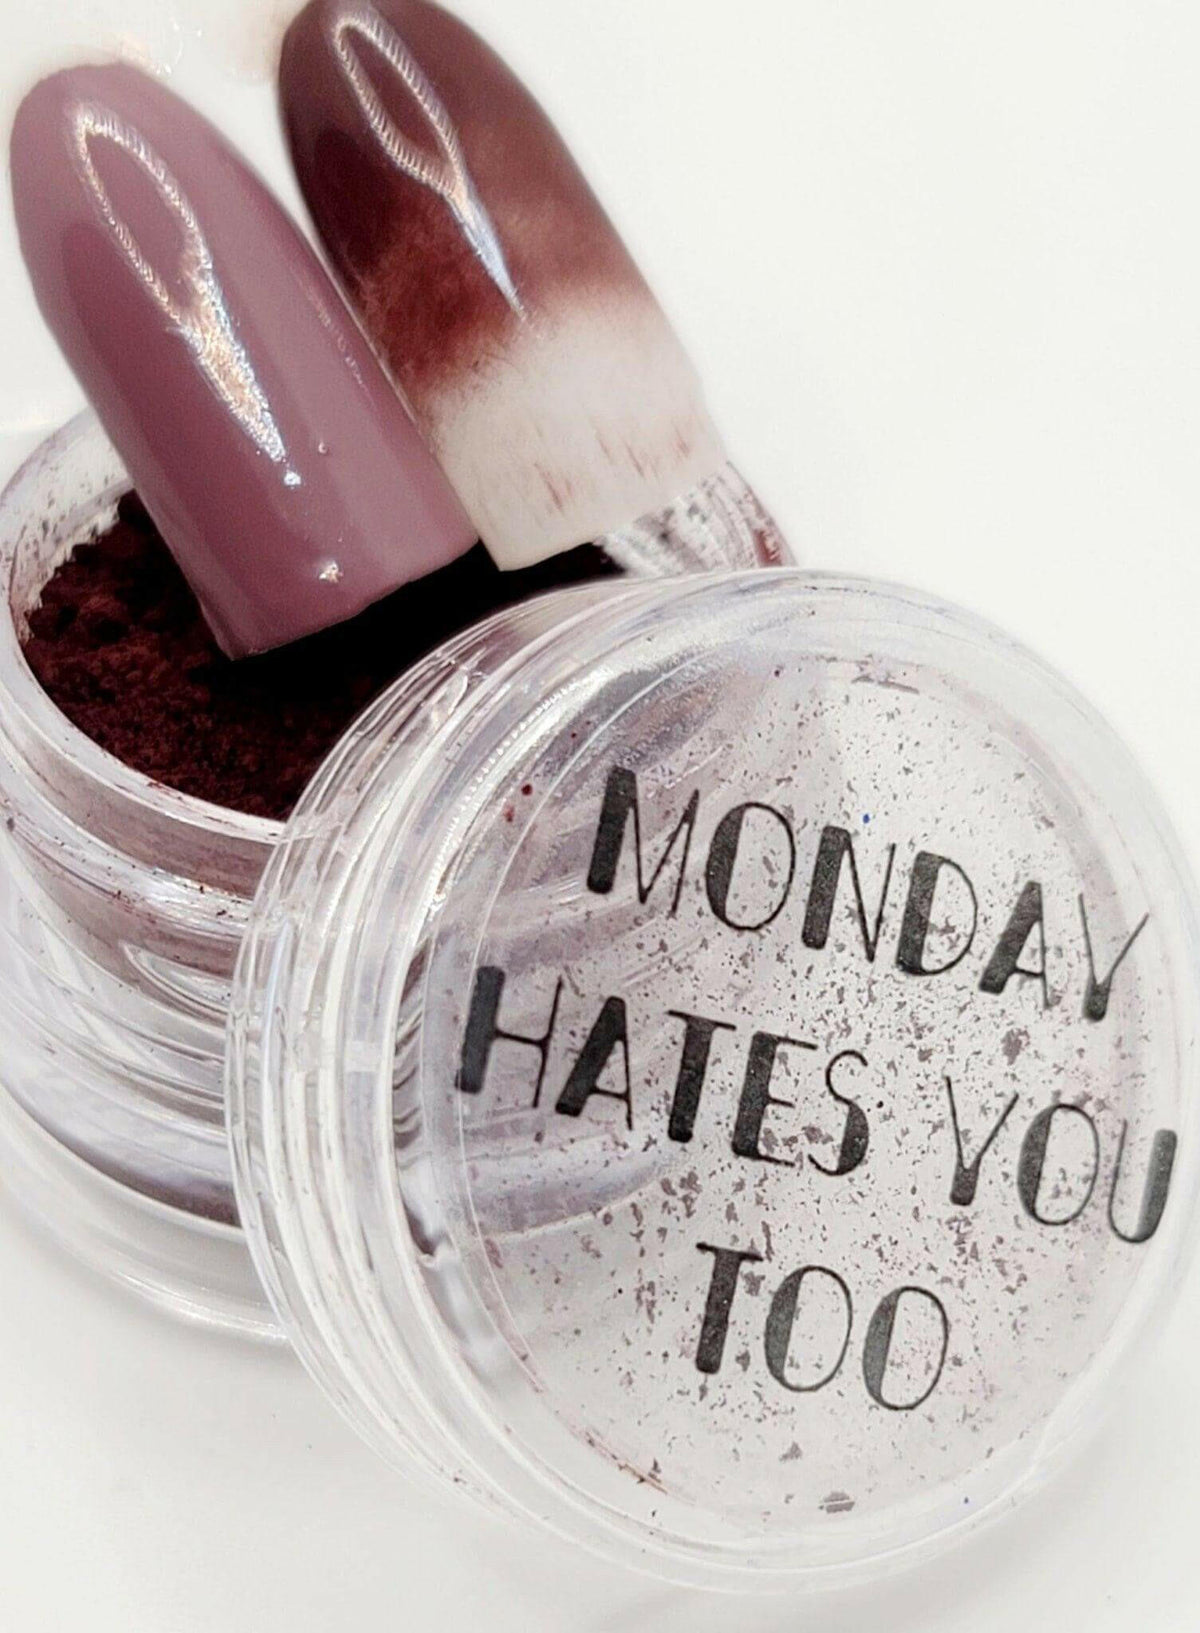 Monday Hates You Too, Pigment by thePINKchair - thePINKchair.ca - Nail Art - thePINKchair nail studio